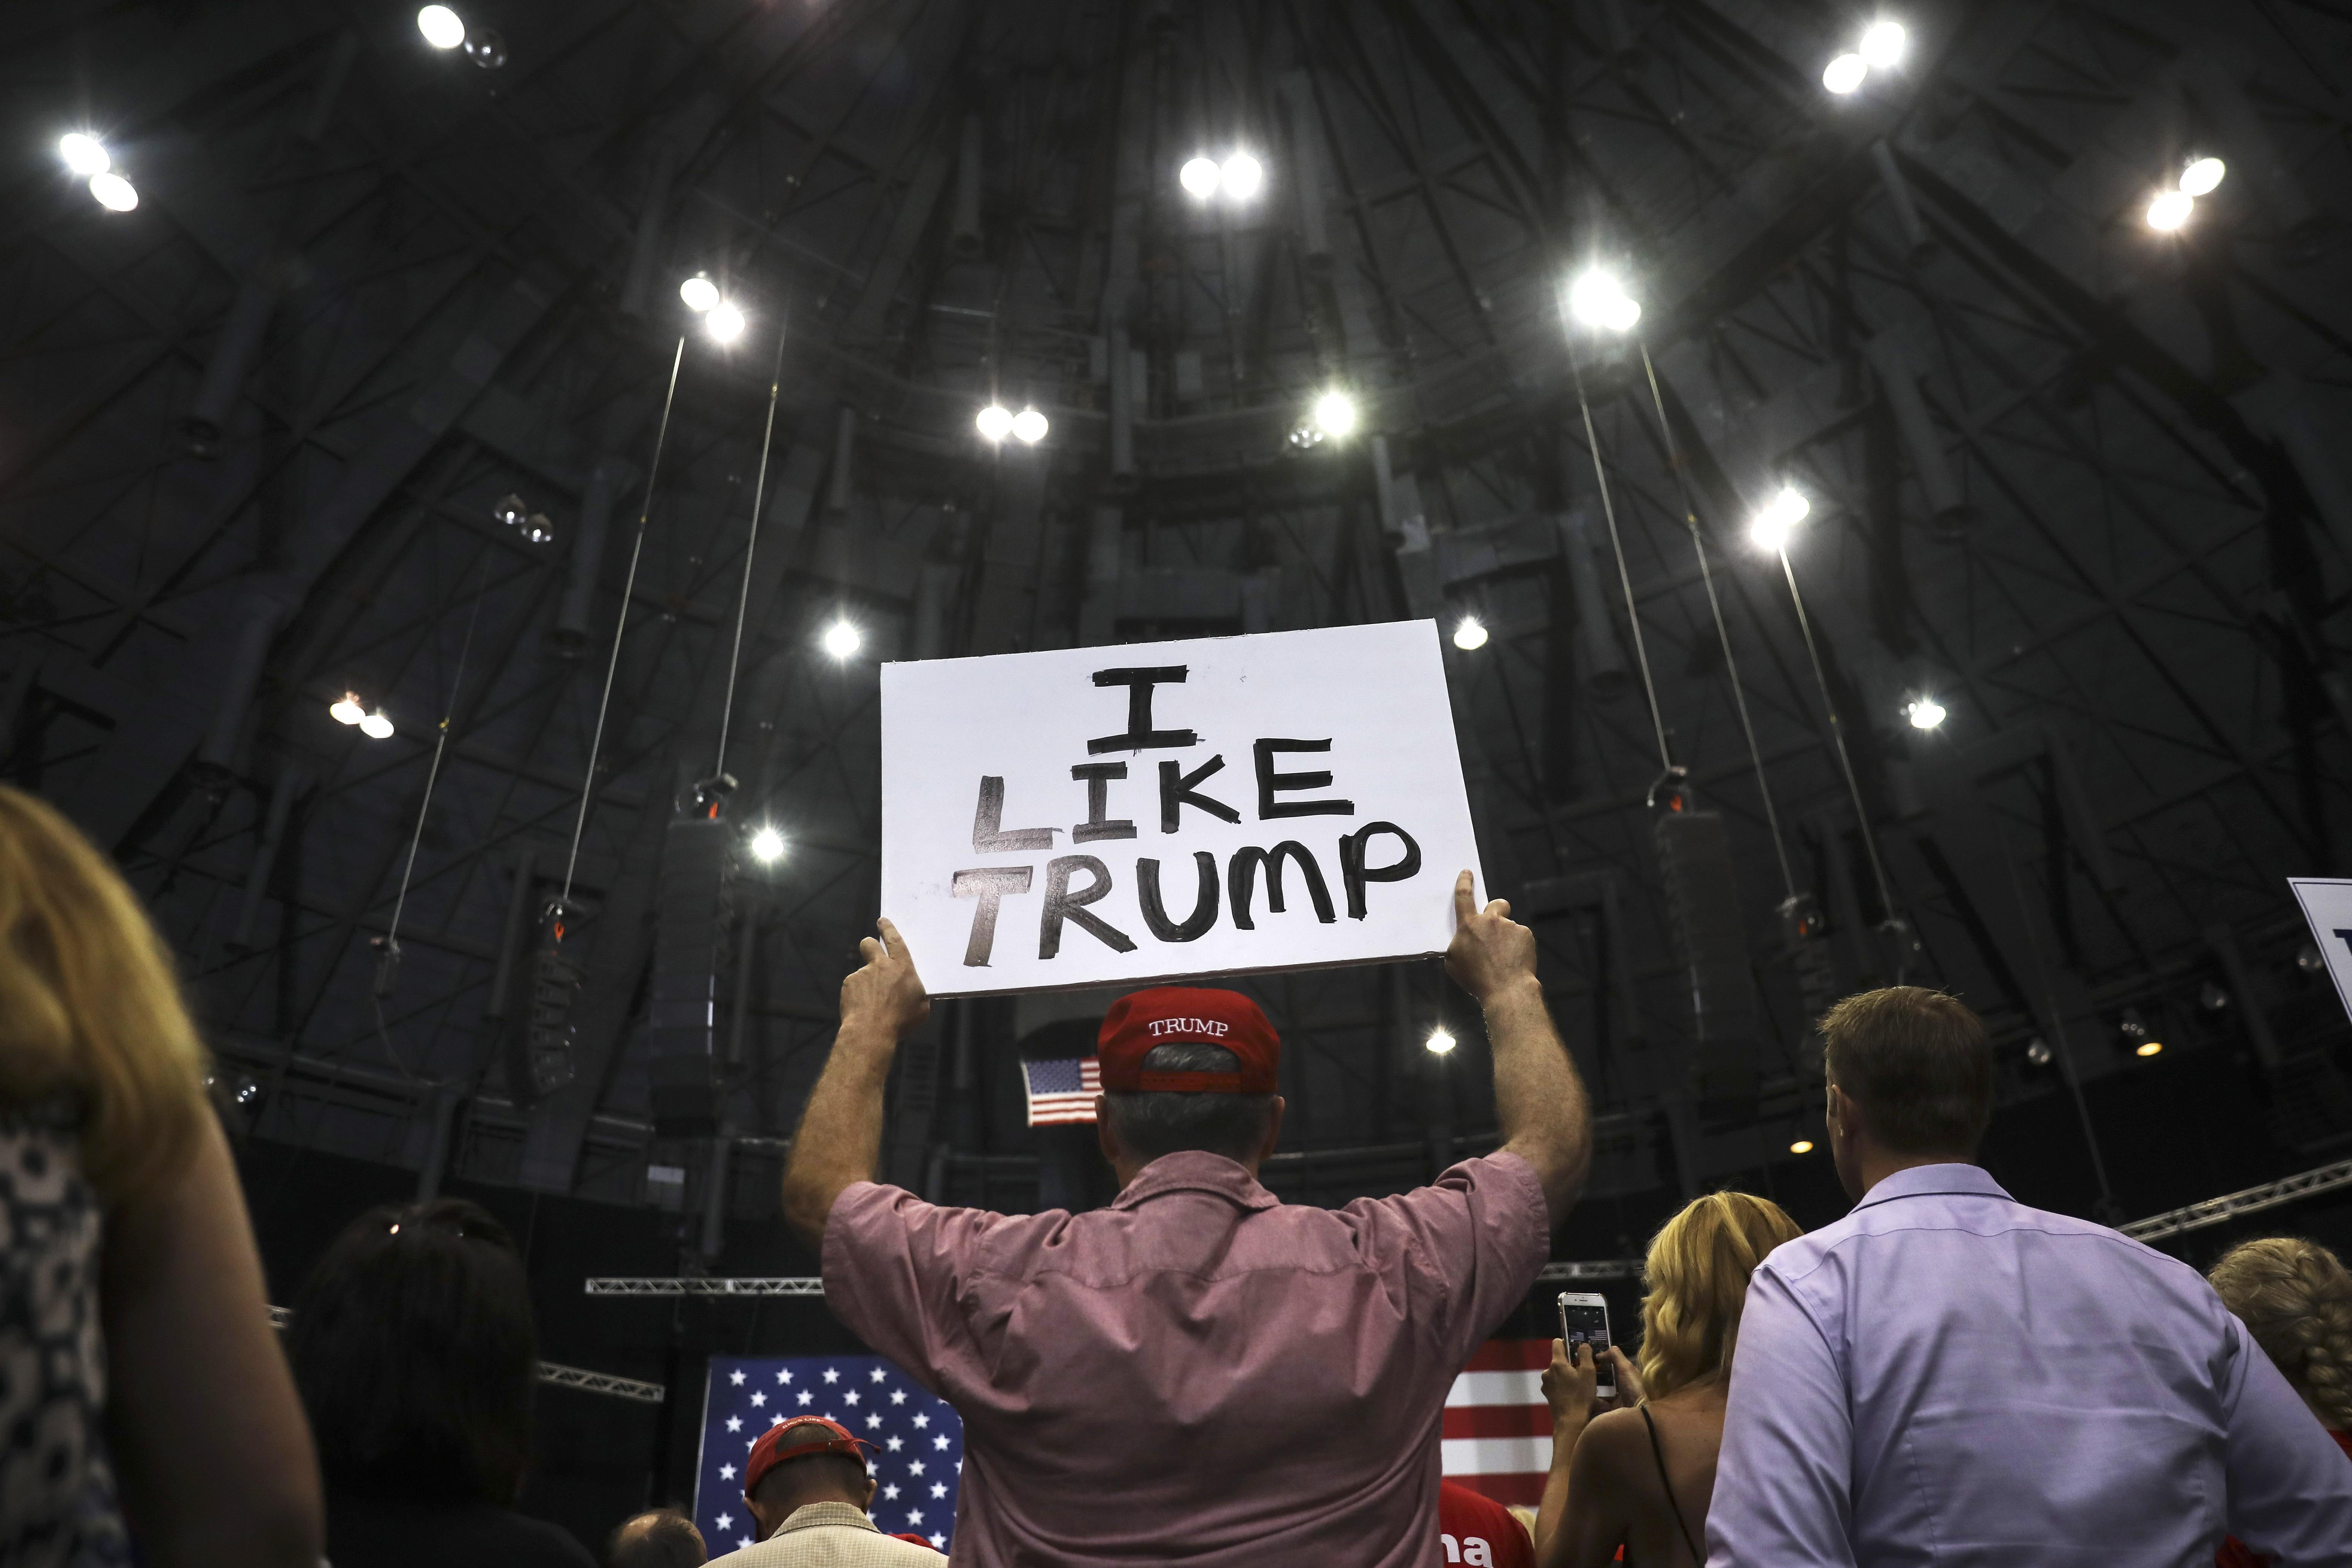 A supporter in a red Trump hat holds up a sign that says, "I like Trump."